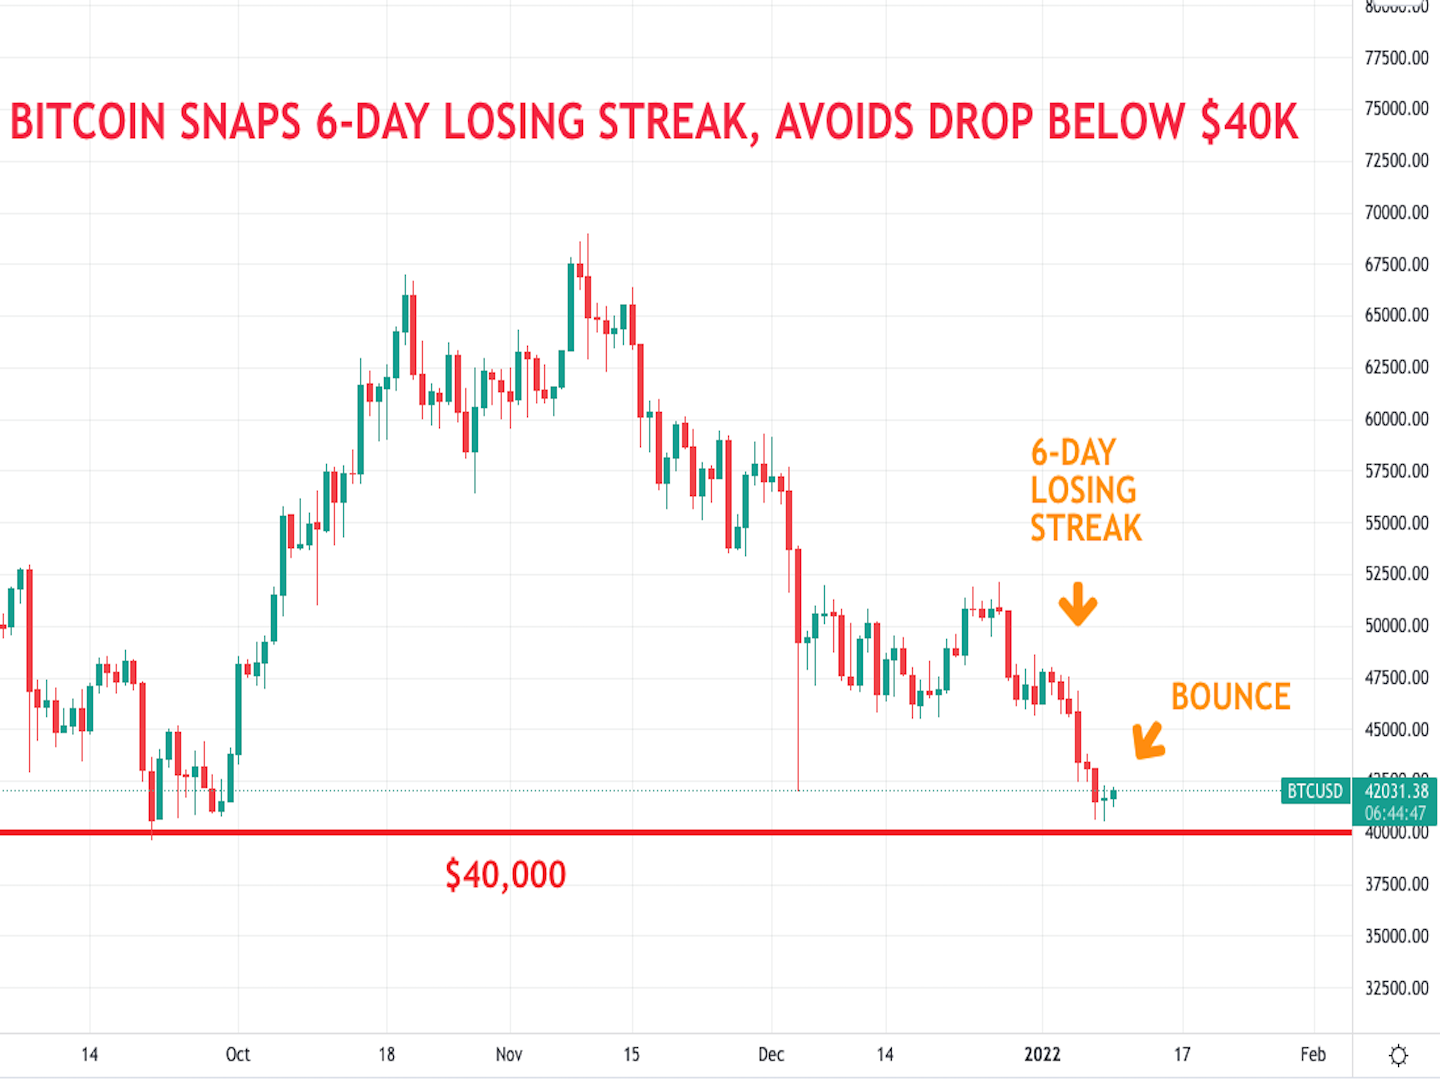 Bitcoin Snaps 6-Day Losing Streak, Holds Above $40K